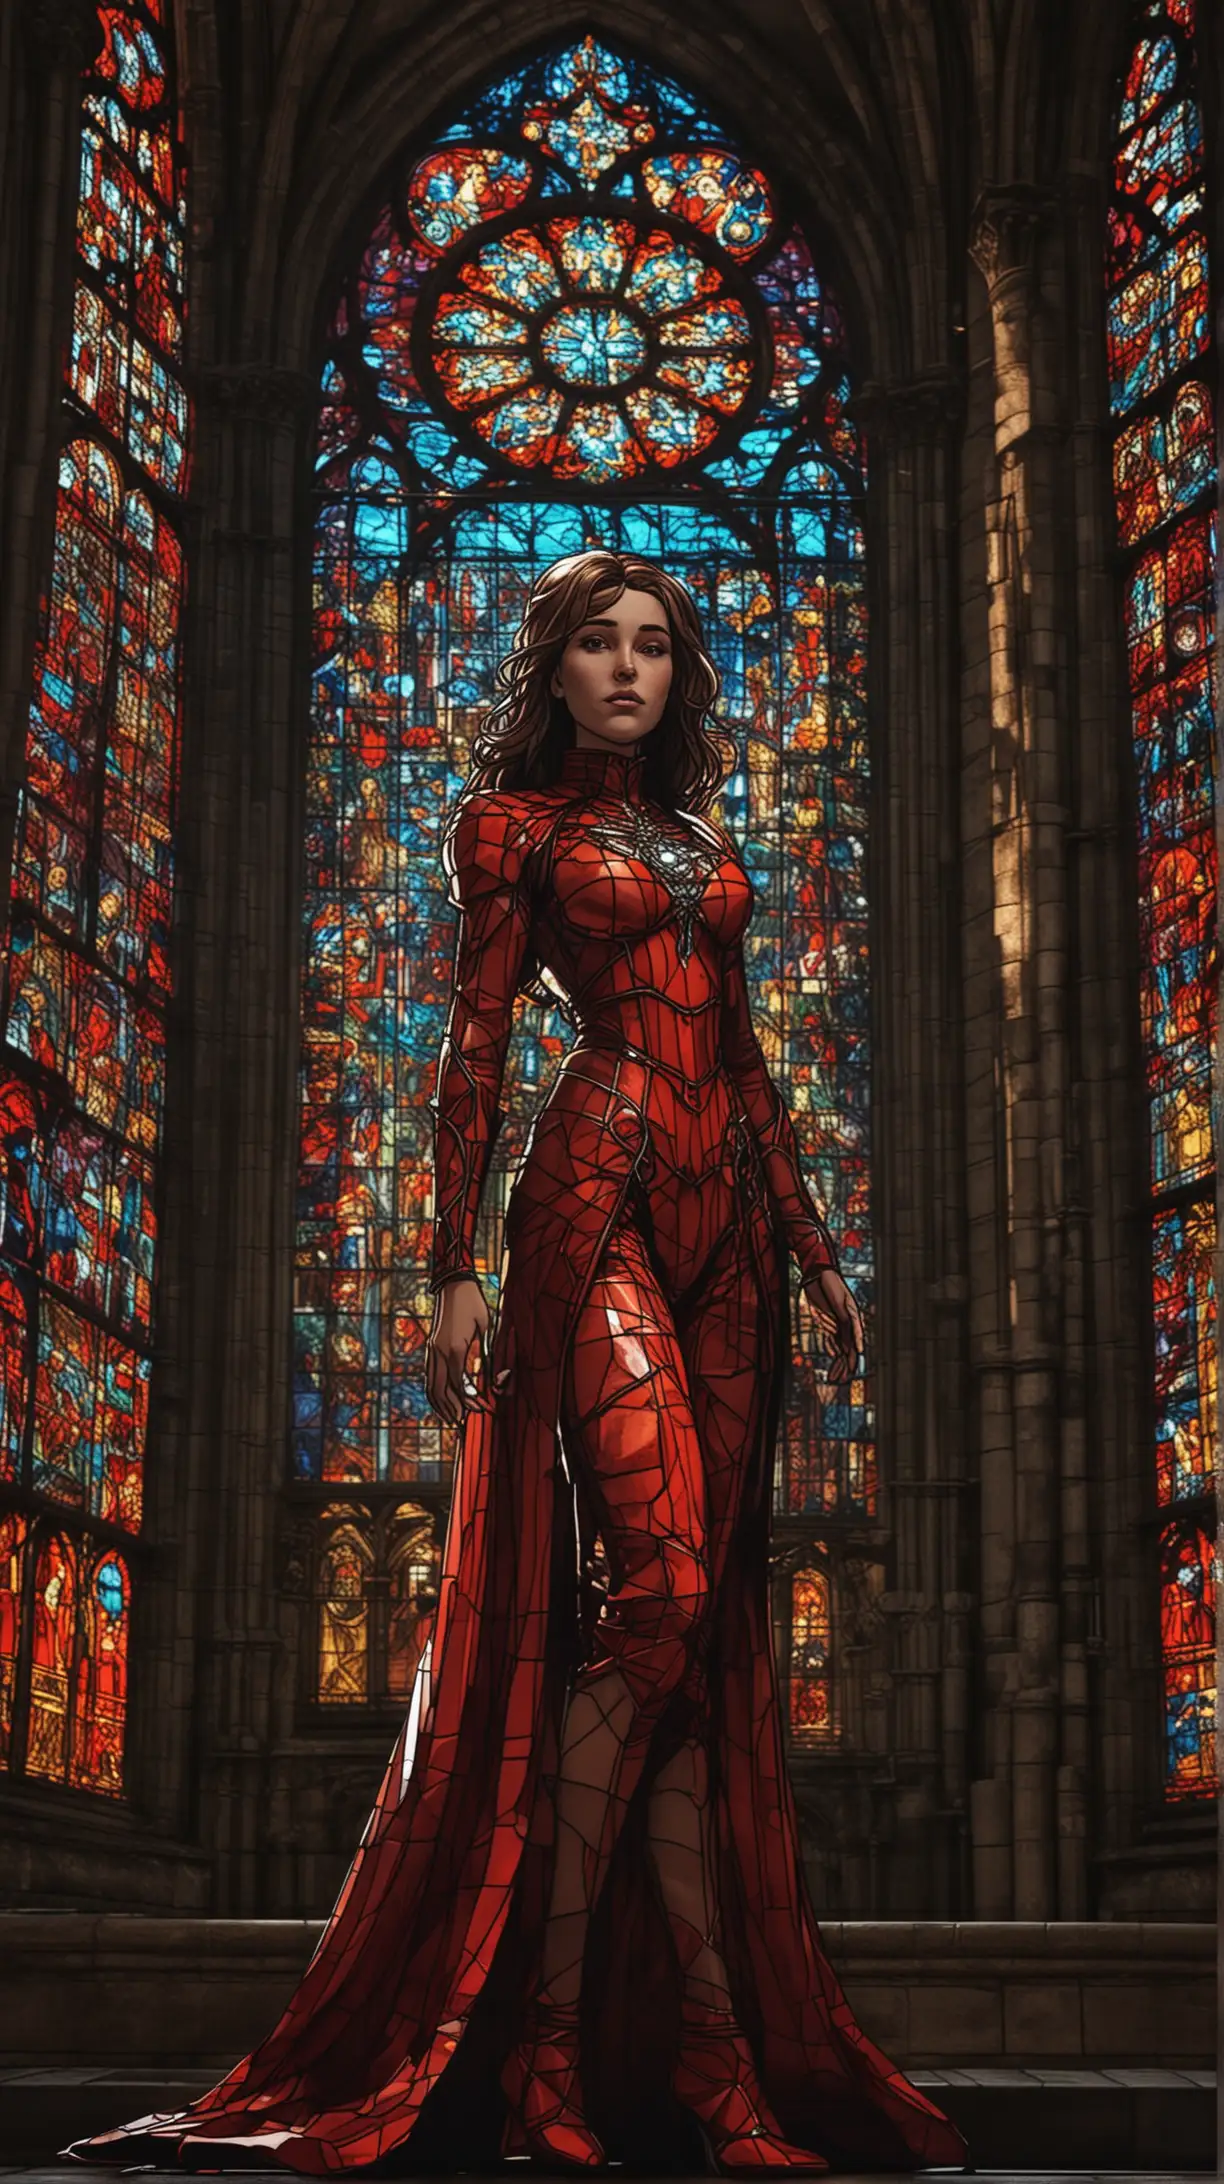 Valentina Comic Character in Cathedral with Stained Glass Effect